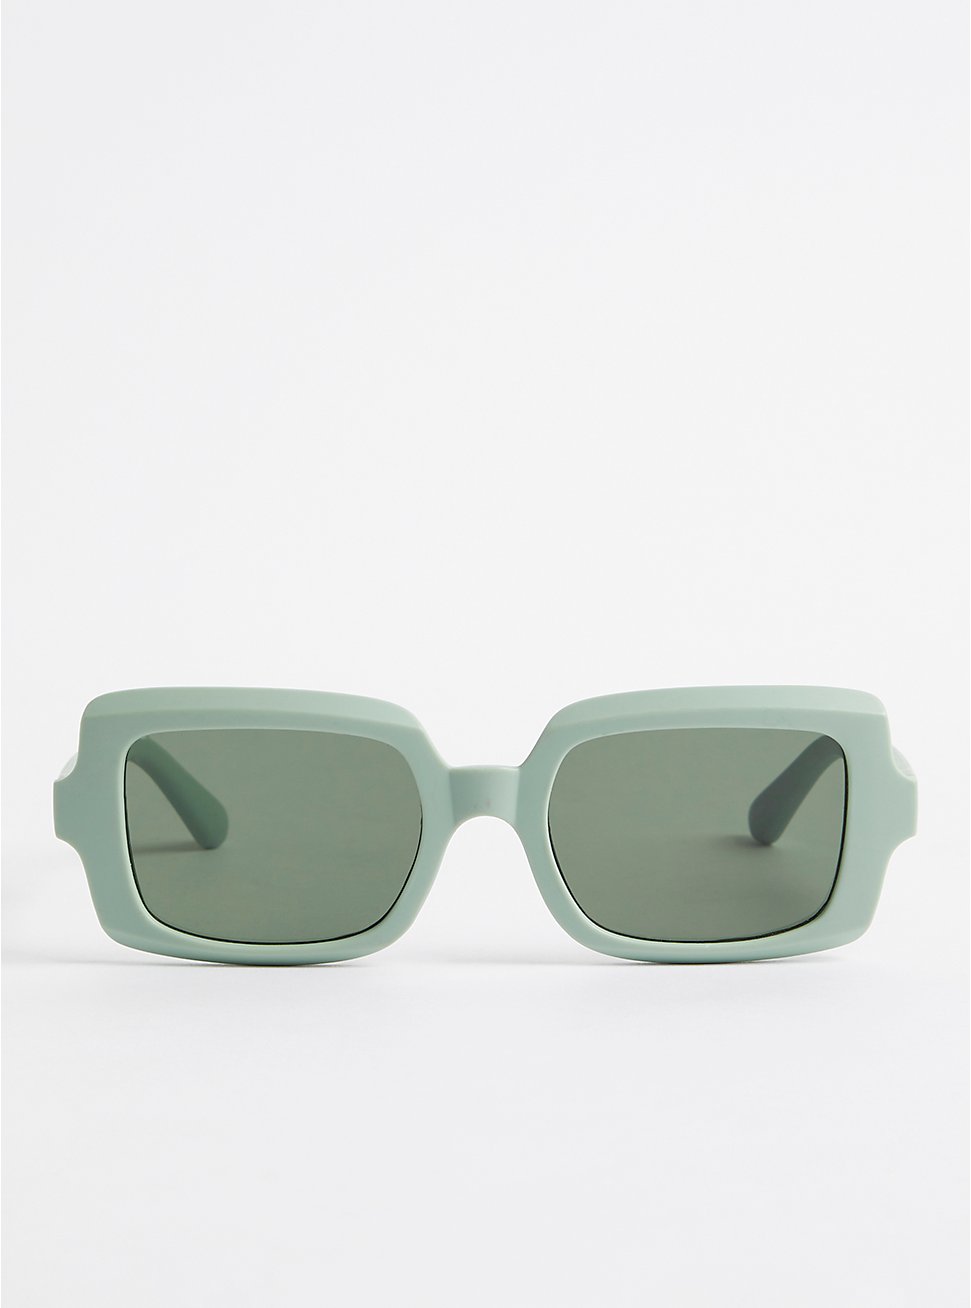 Small Rectangle Sunglasses - Matte Green with Smoke Lens, , hi-res